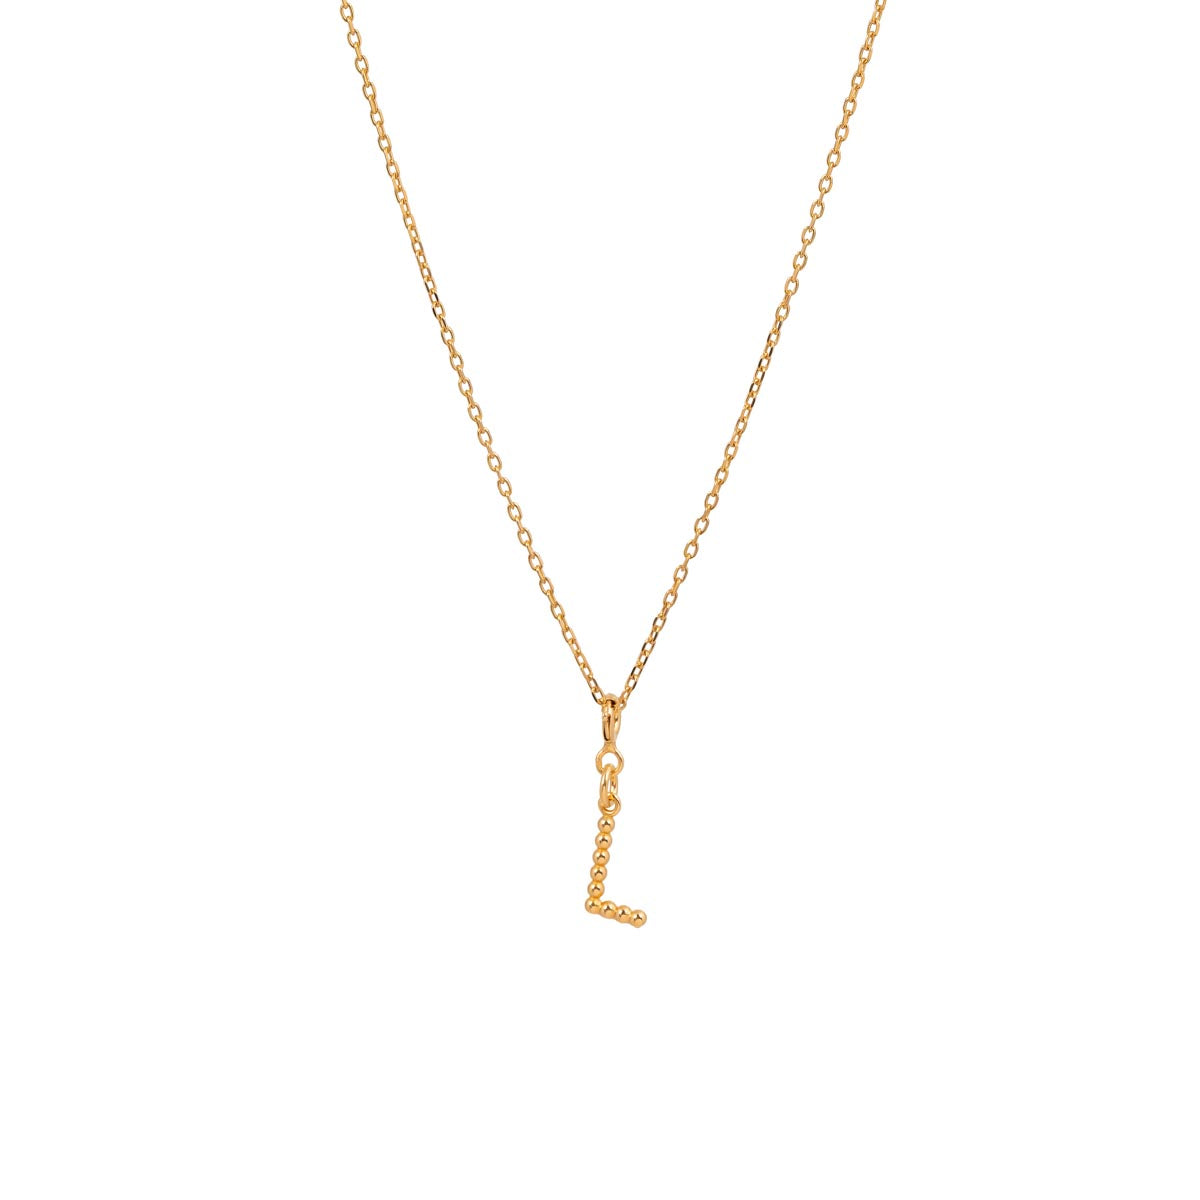 Yllätys Monogram Necklace L, gold-plated silver